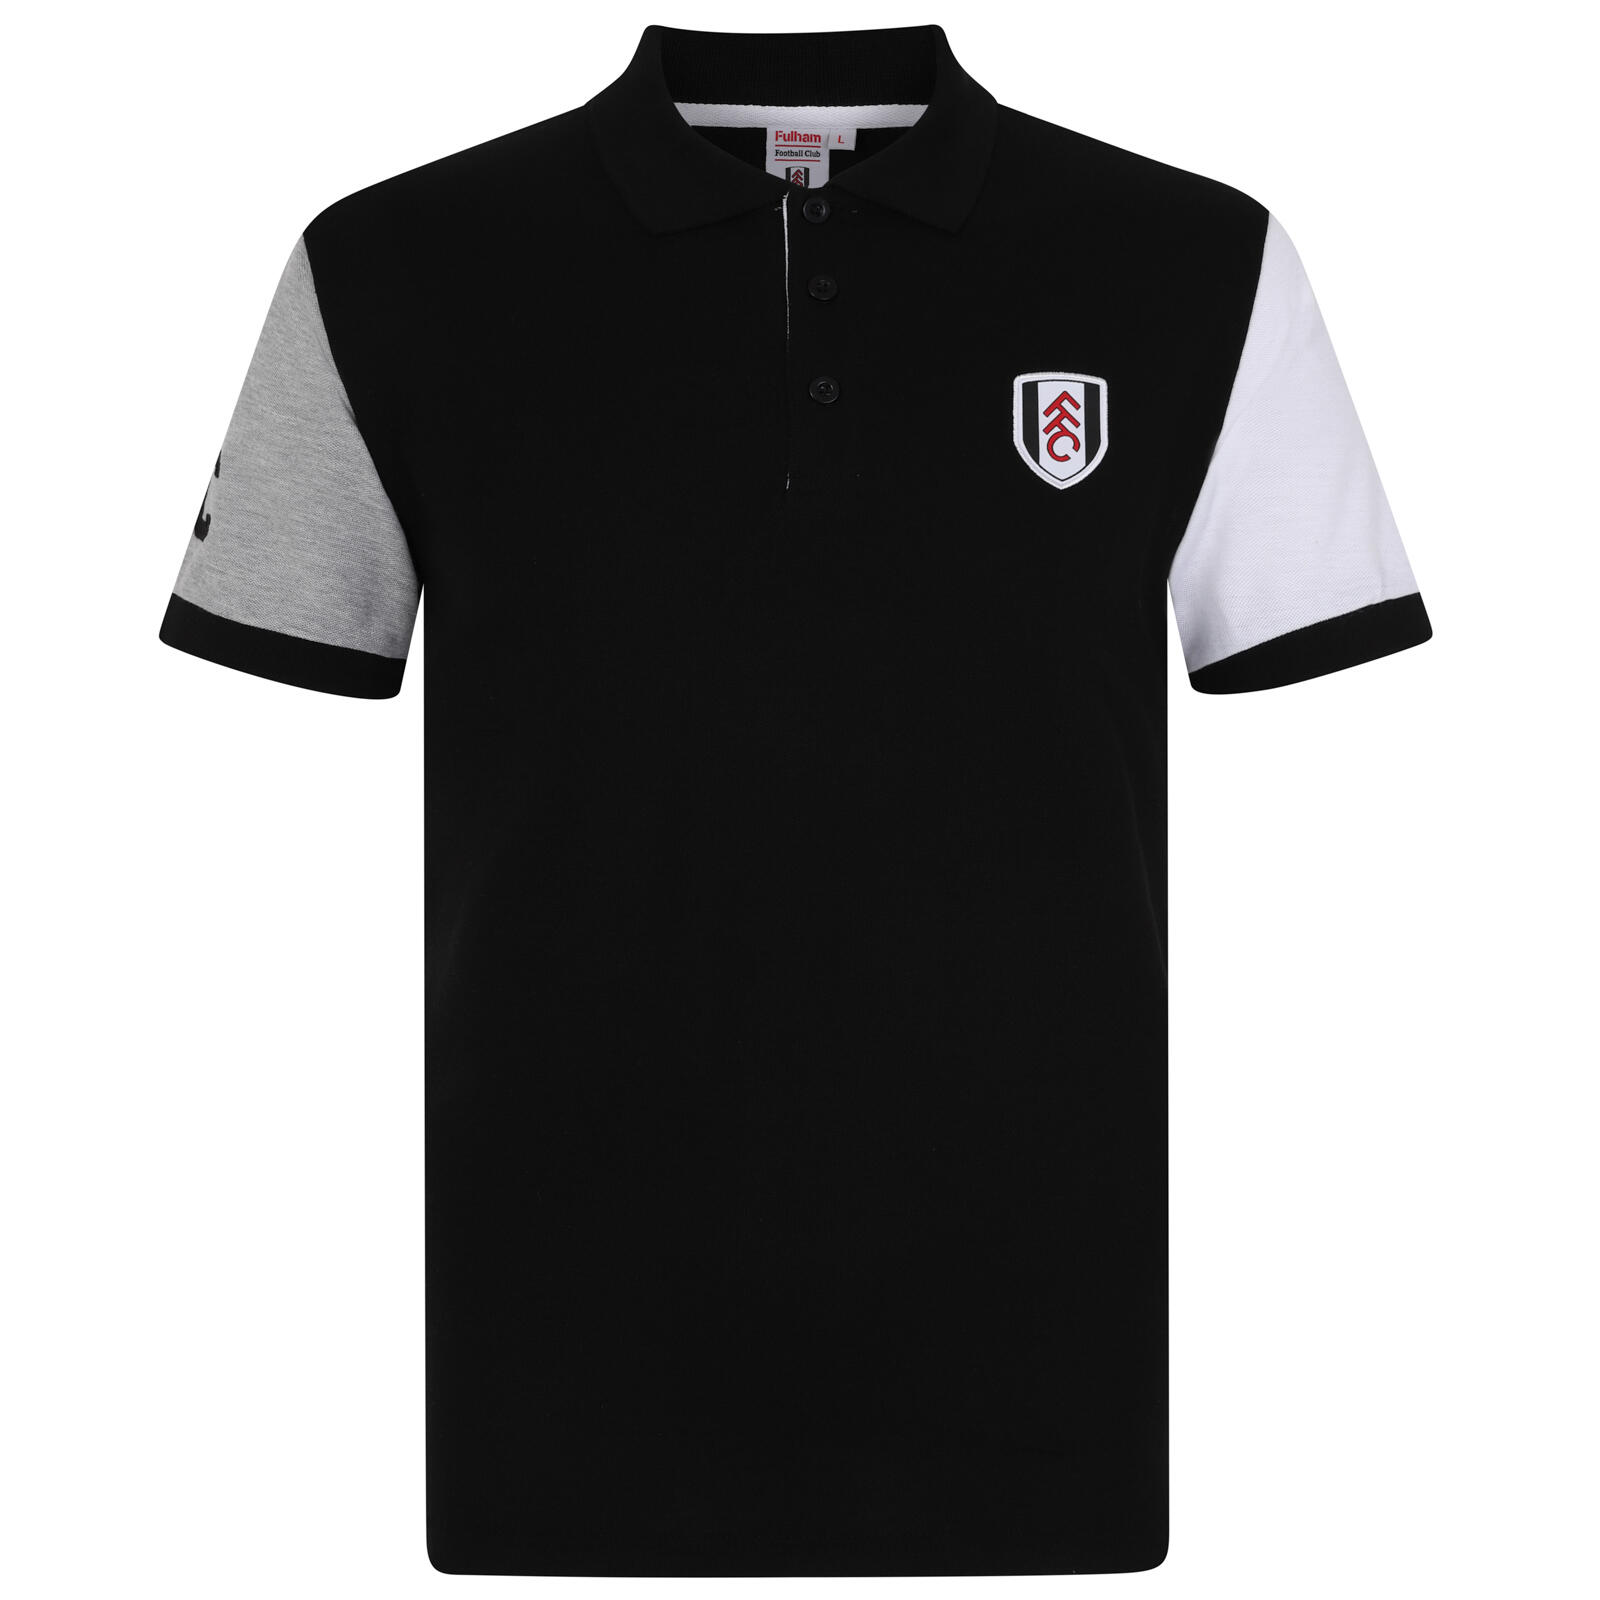 Fulham FC Mens Polo Shirt Contrast Sleeve OFFICIAL Football Gift 1/5